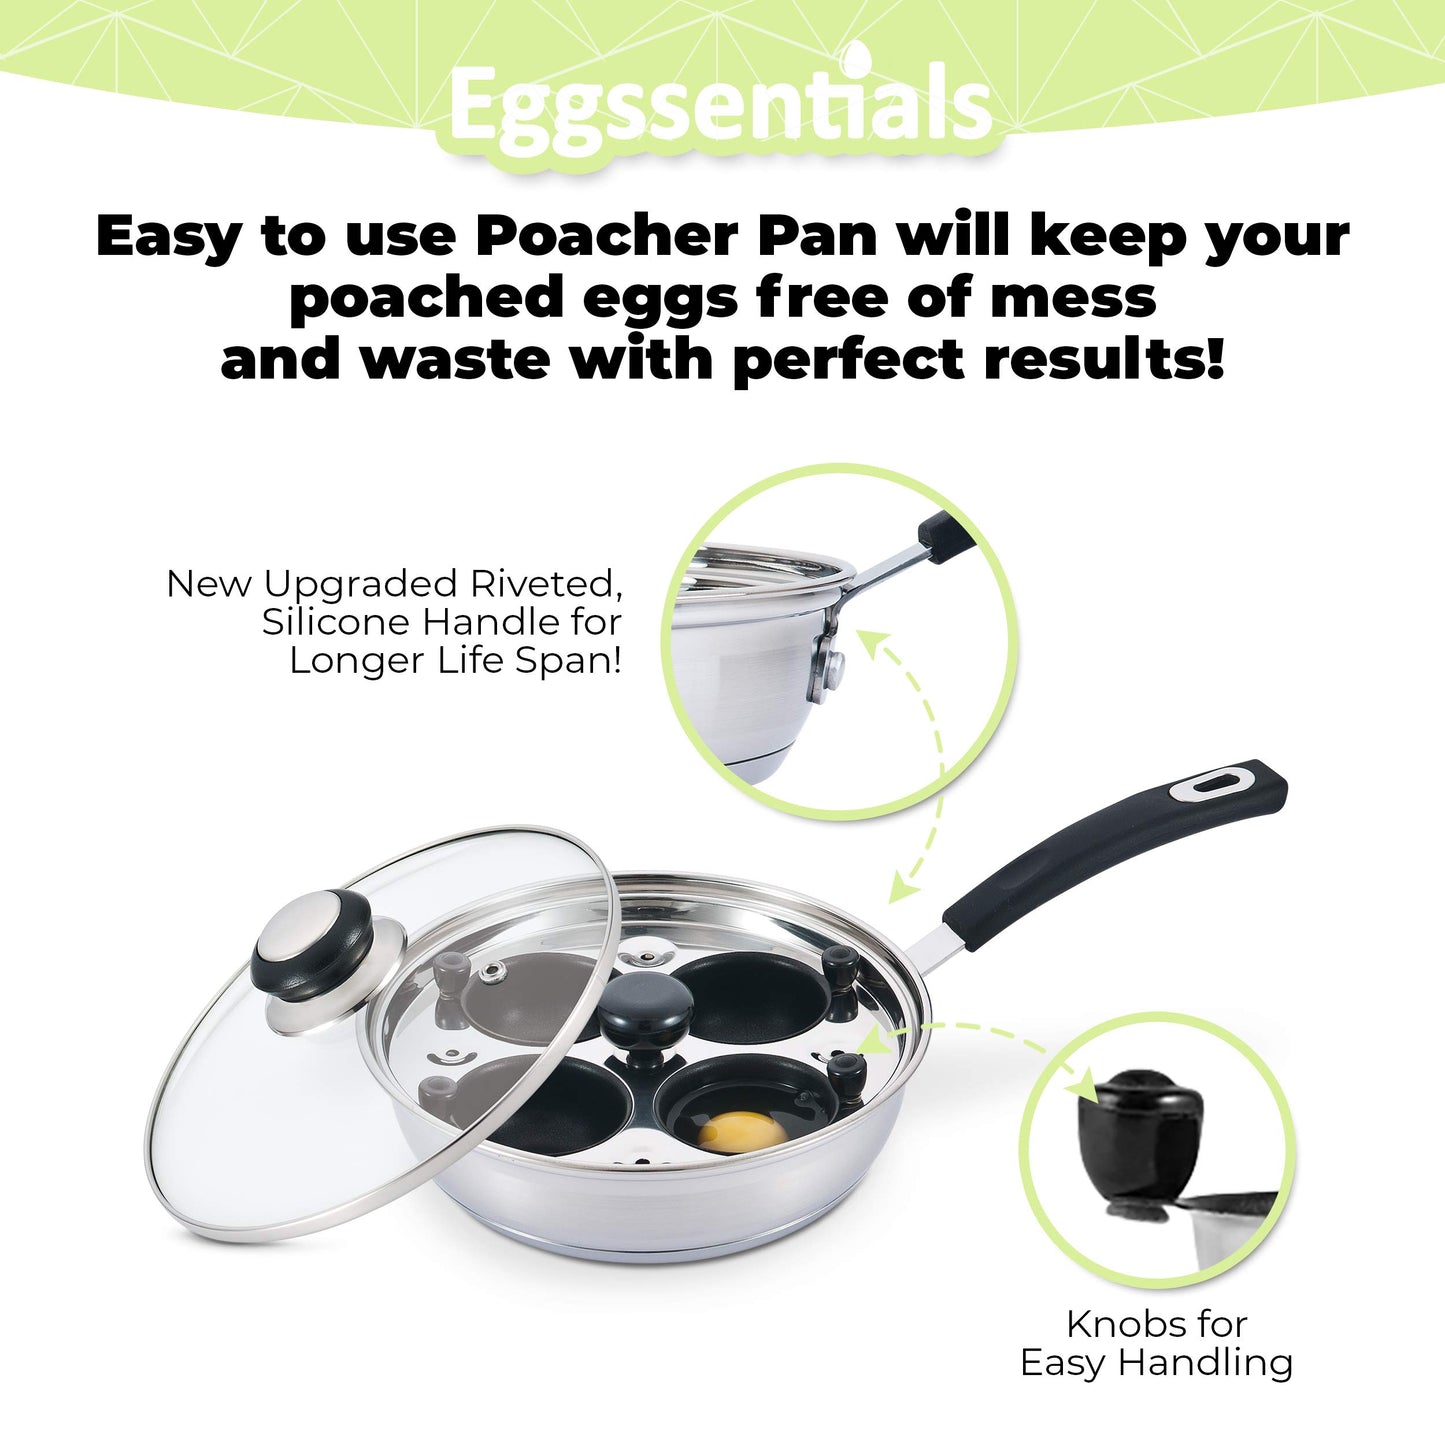 Egg Poacher - Eggssentials Poached Egg Maker, Stainless Steel Egg Poaching Pan, Poached Eggs Cooker Food Grade Safe PFOA Free with Spatula